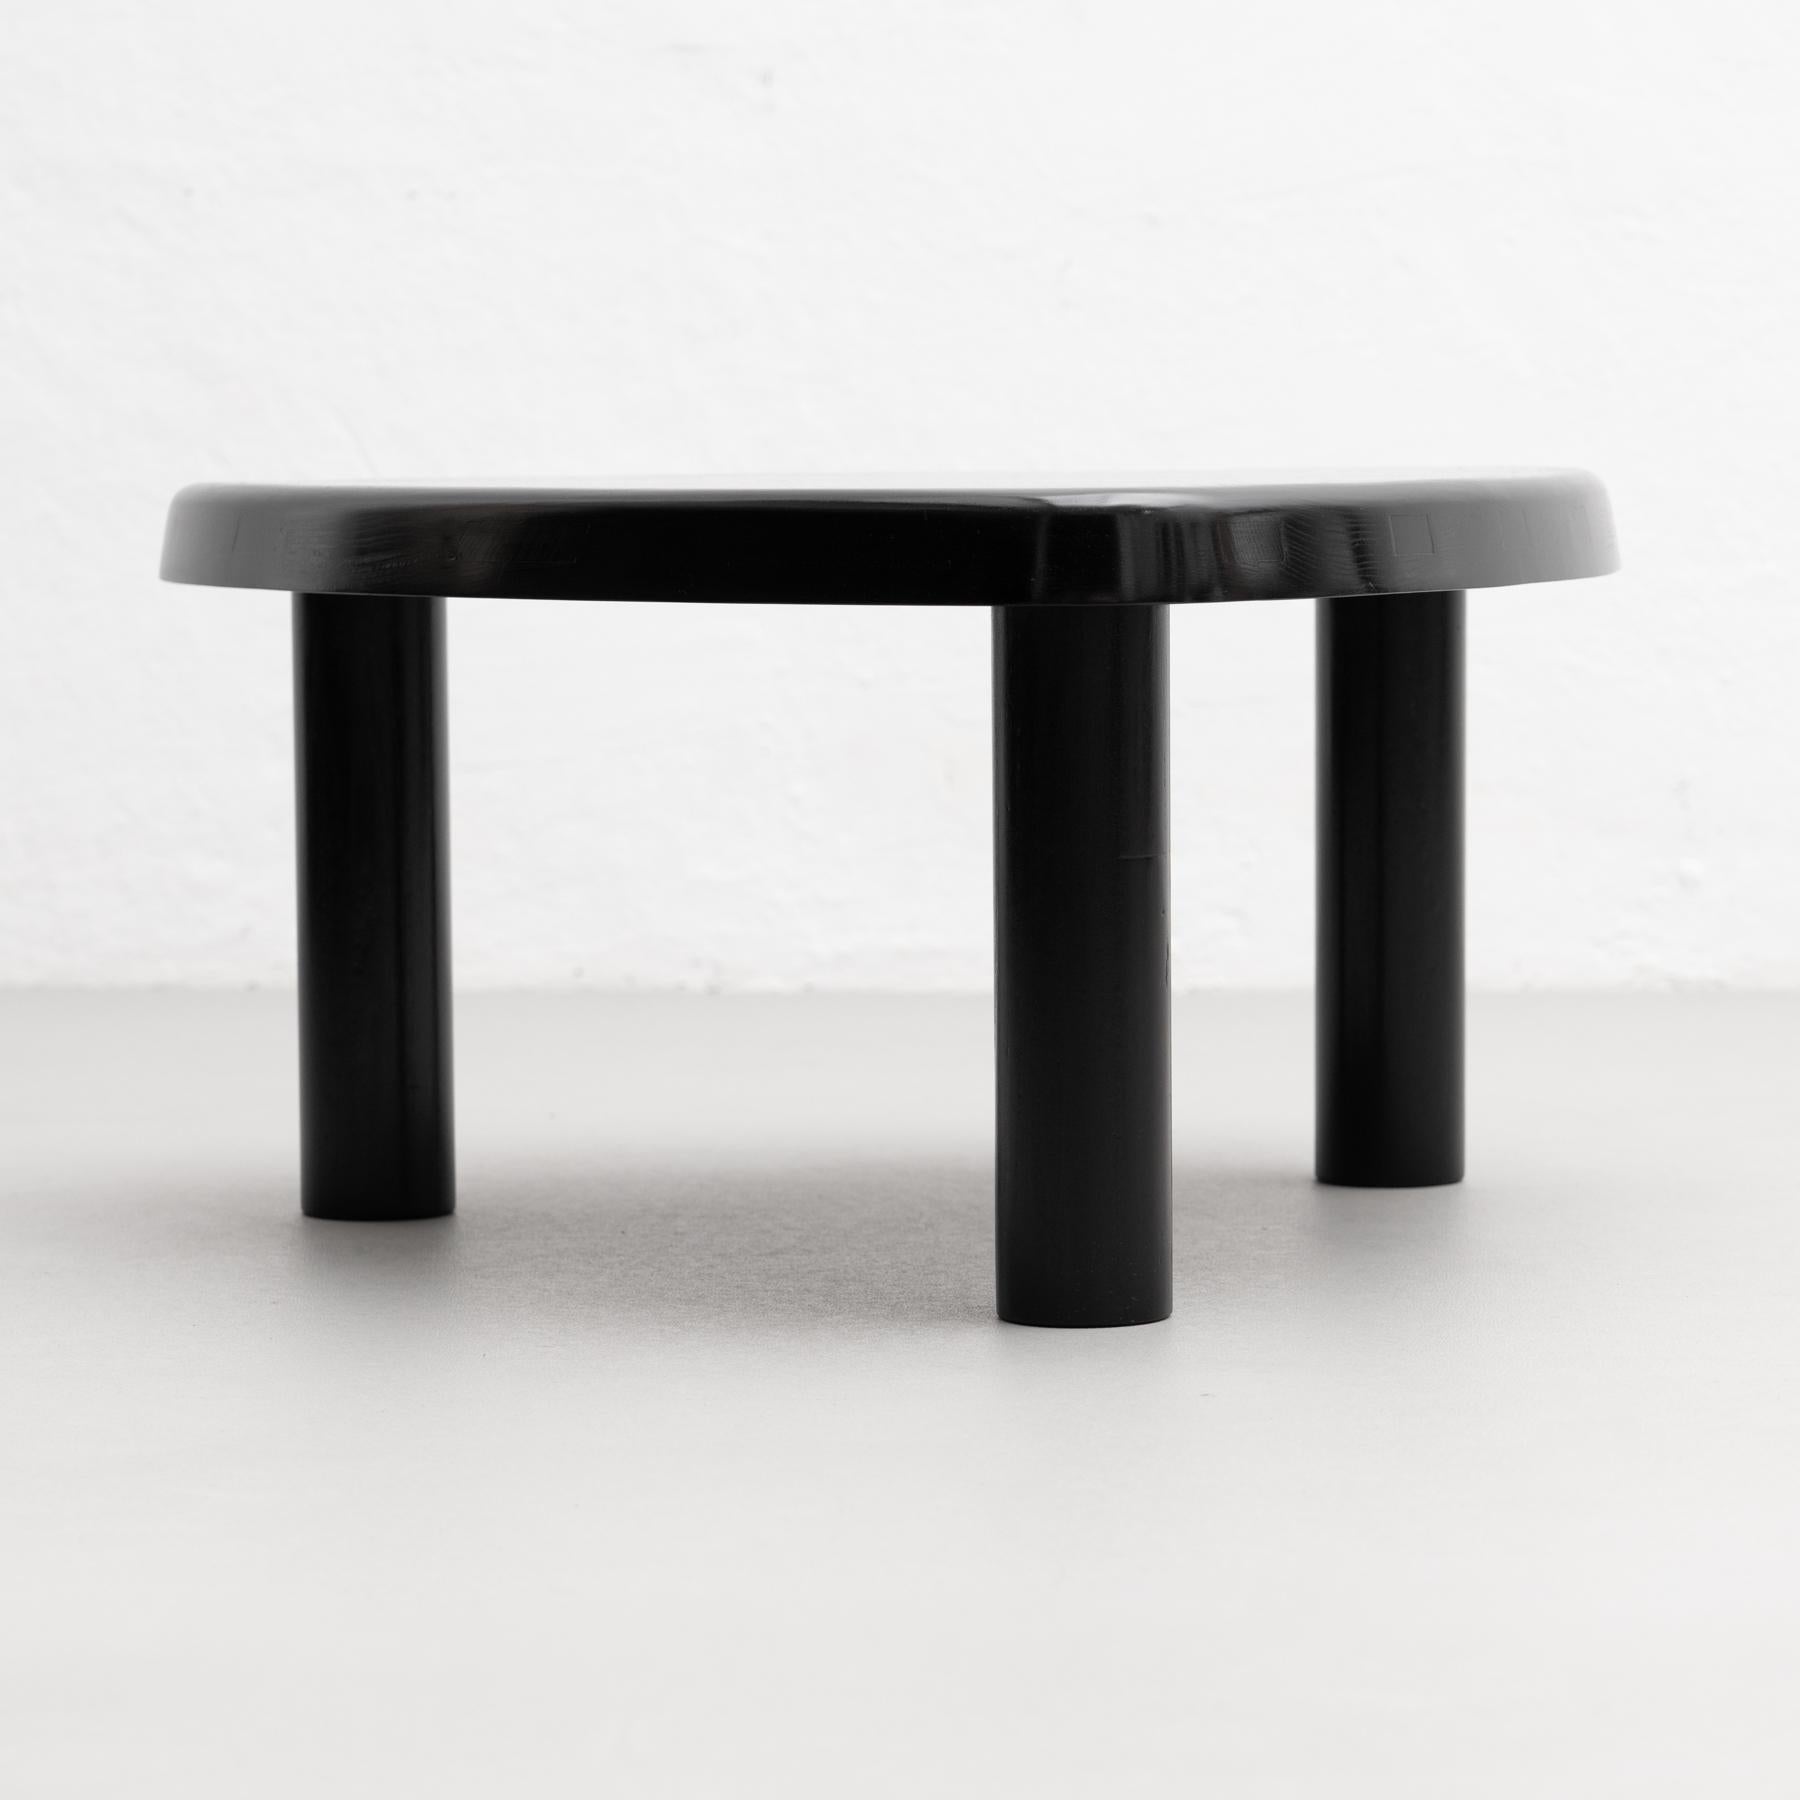 Pierre Chapo Special Black Edition T23 Wood Side Table 1